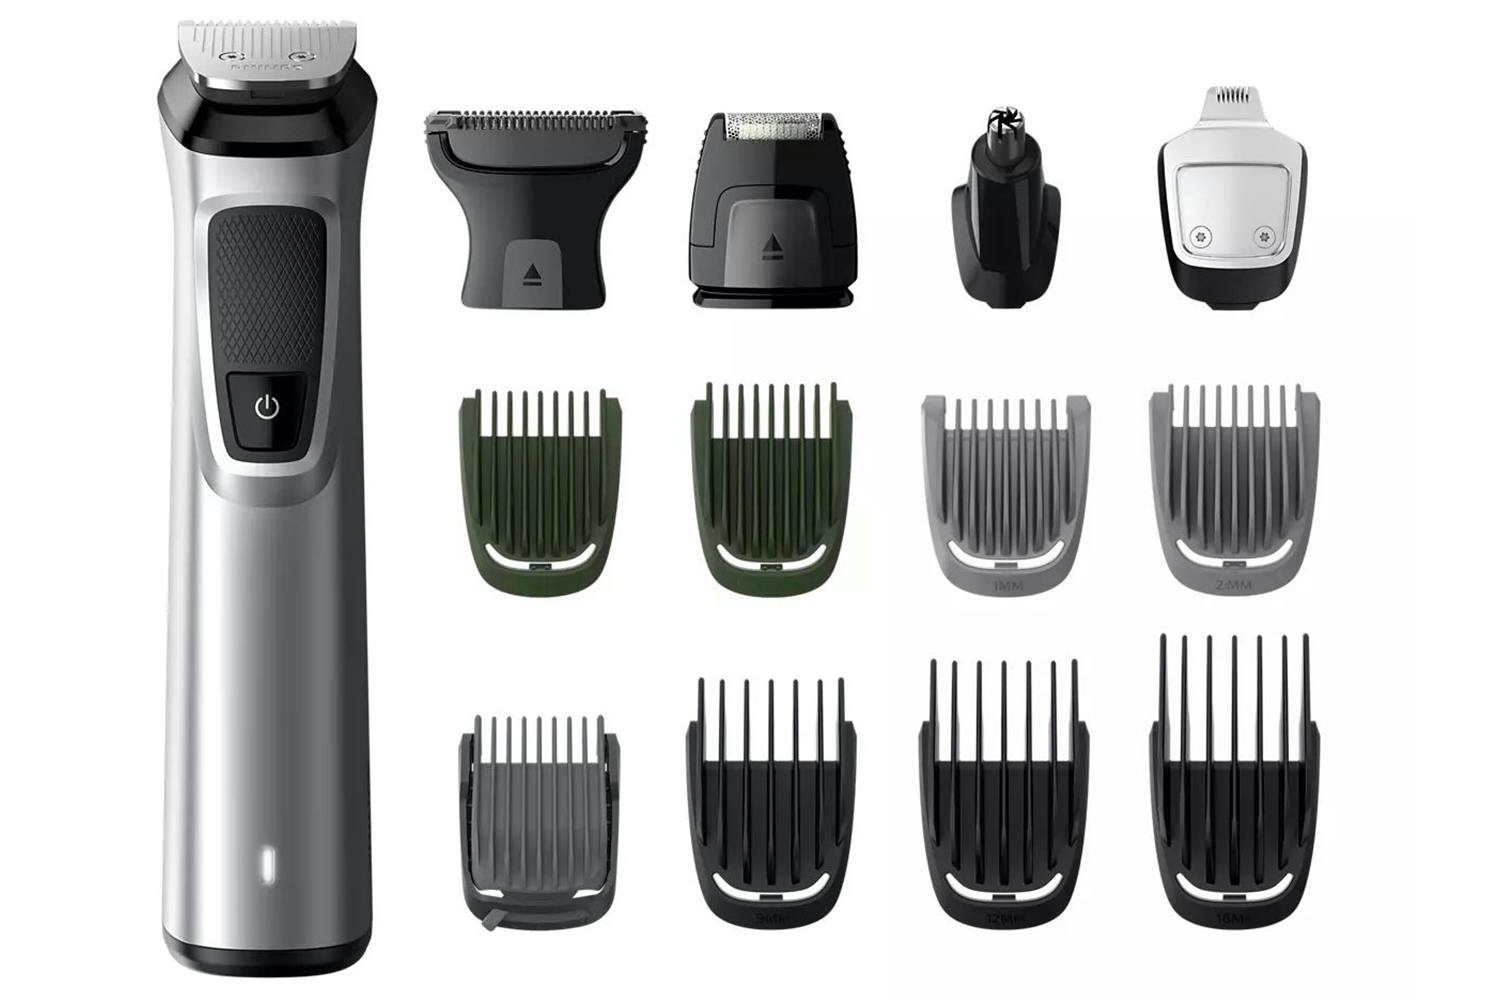 https://hniesfp.imgix.net/8/images/detailed/294/Trimmer_Philips_MG772013_1.jpg?fit=fill&bg=0FFF&w=1500&h=1000&auto=format,compress